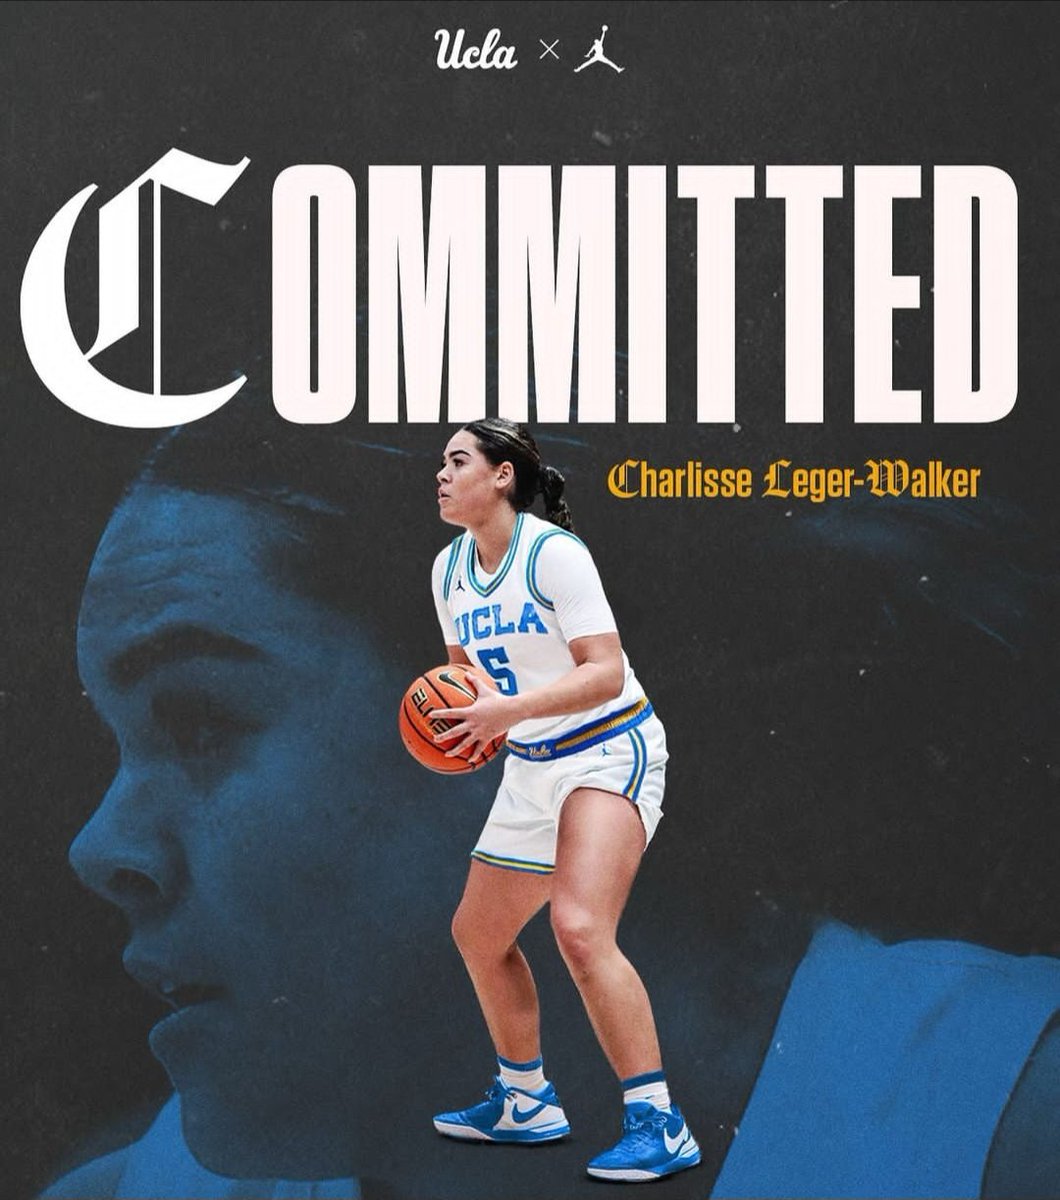 🚨 Breaking: #UCLA WBB has picked up a transfer commitment from former Washington St. guard Charlisse Leger-Walker. The 5-foot-10 senior is a career 16.6 PPG scorer who the Bruins are very familiar with. She will immediately come in and help replace Charisma Osborne. Big news...